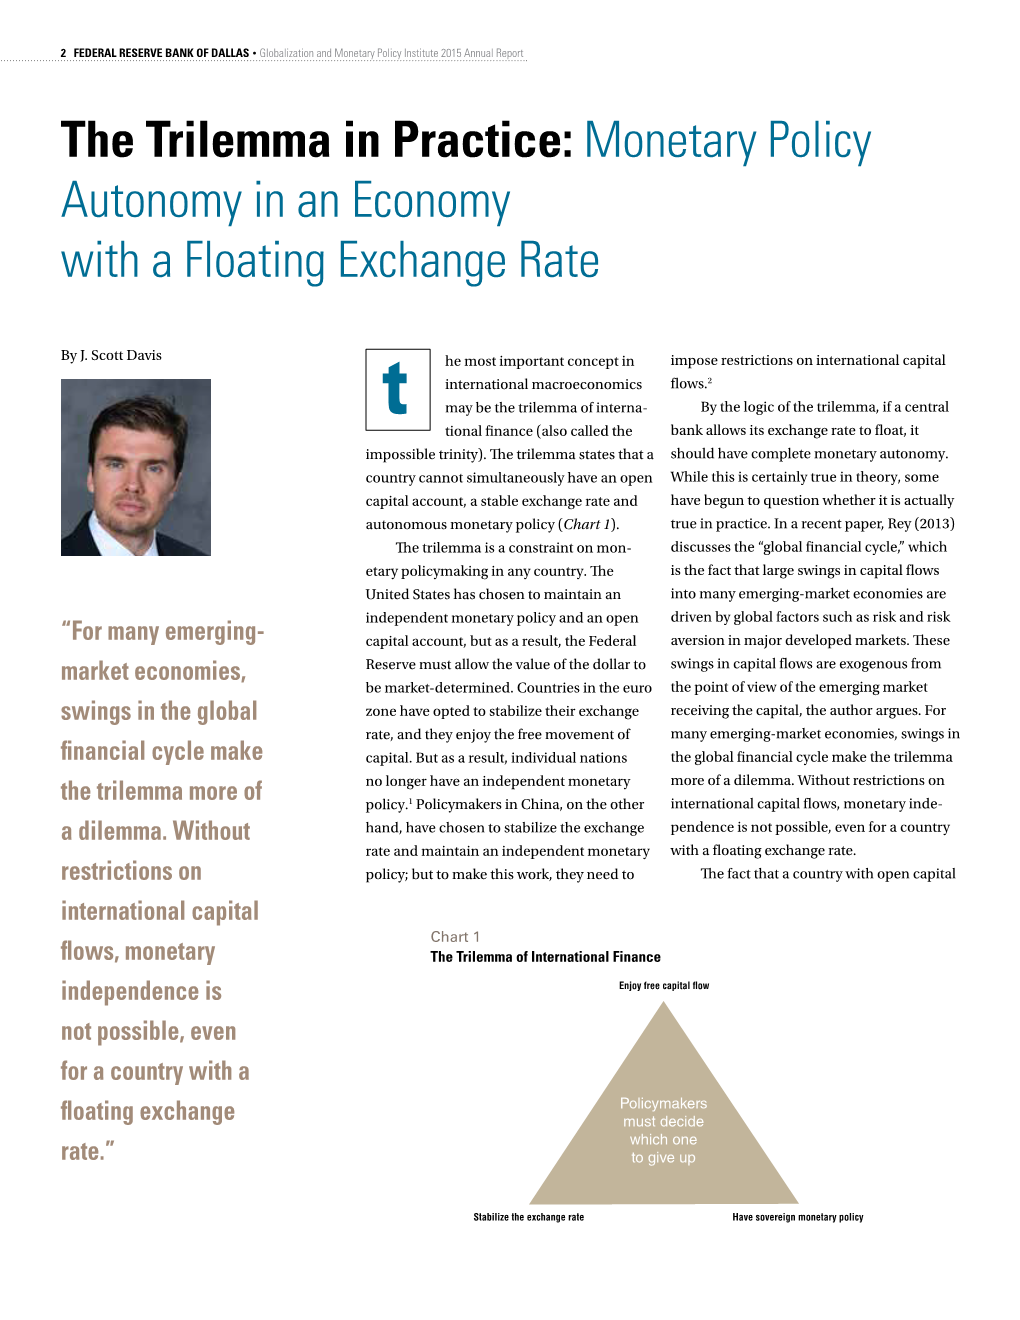 The Trilemma in Practice: Monetary Policy Autonomy in an Economy with a Floating Exchange Rate